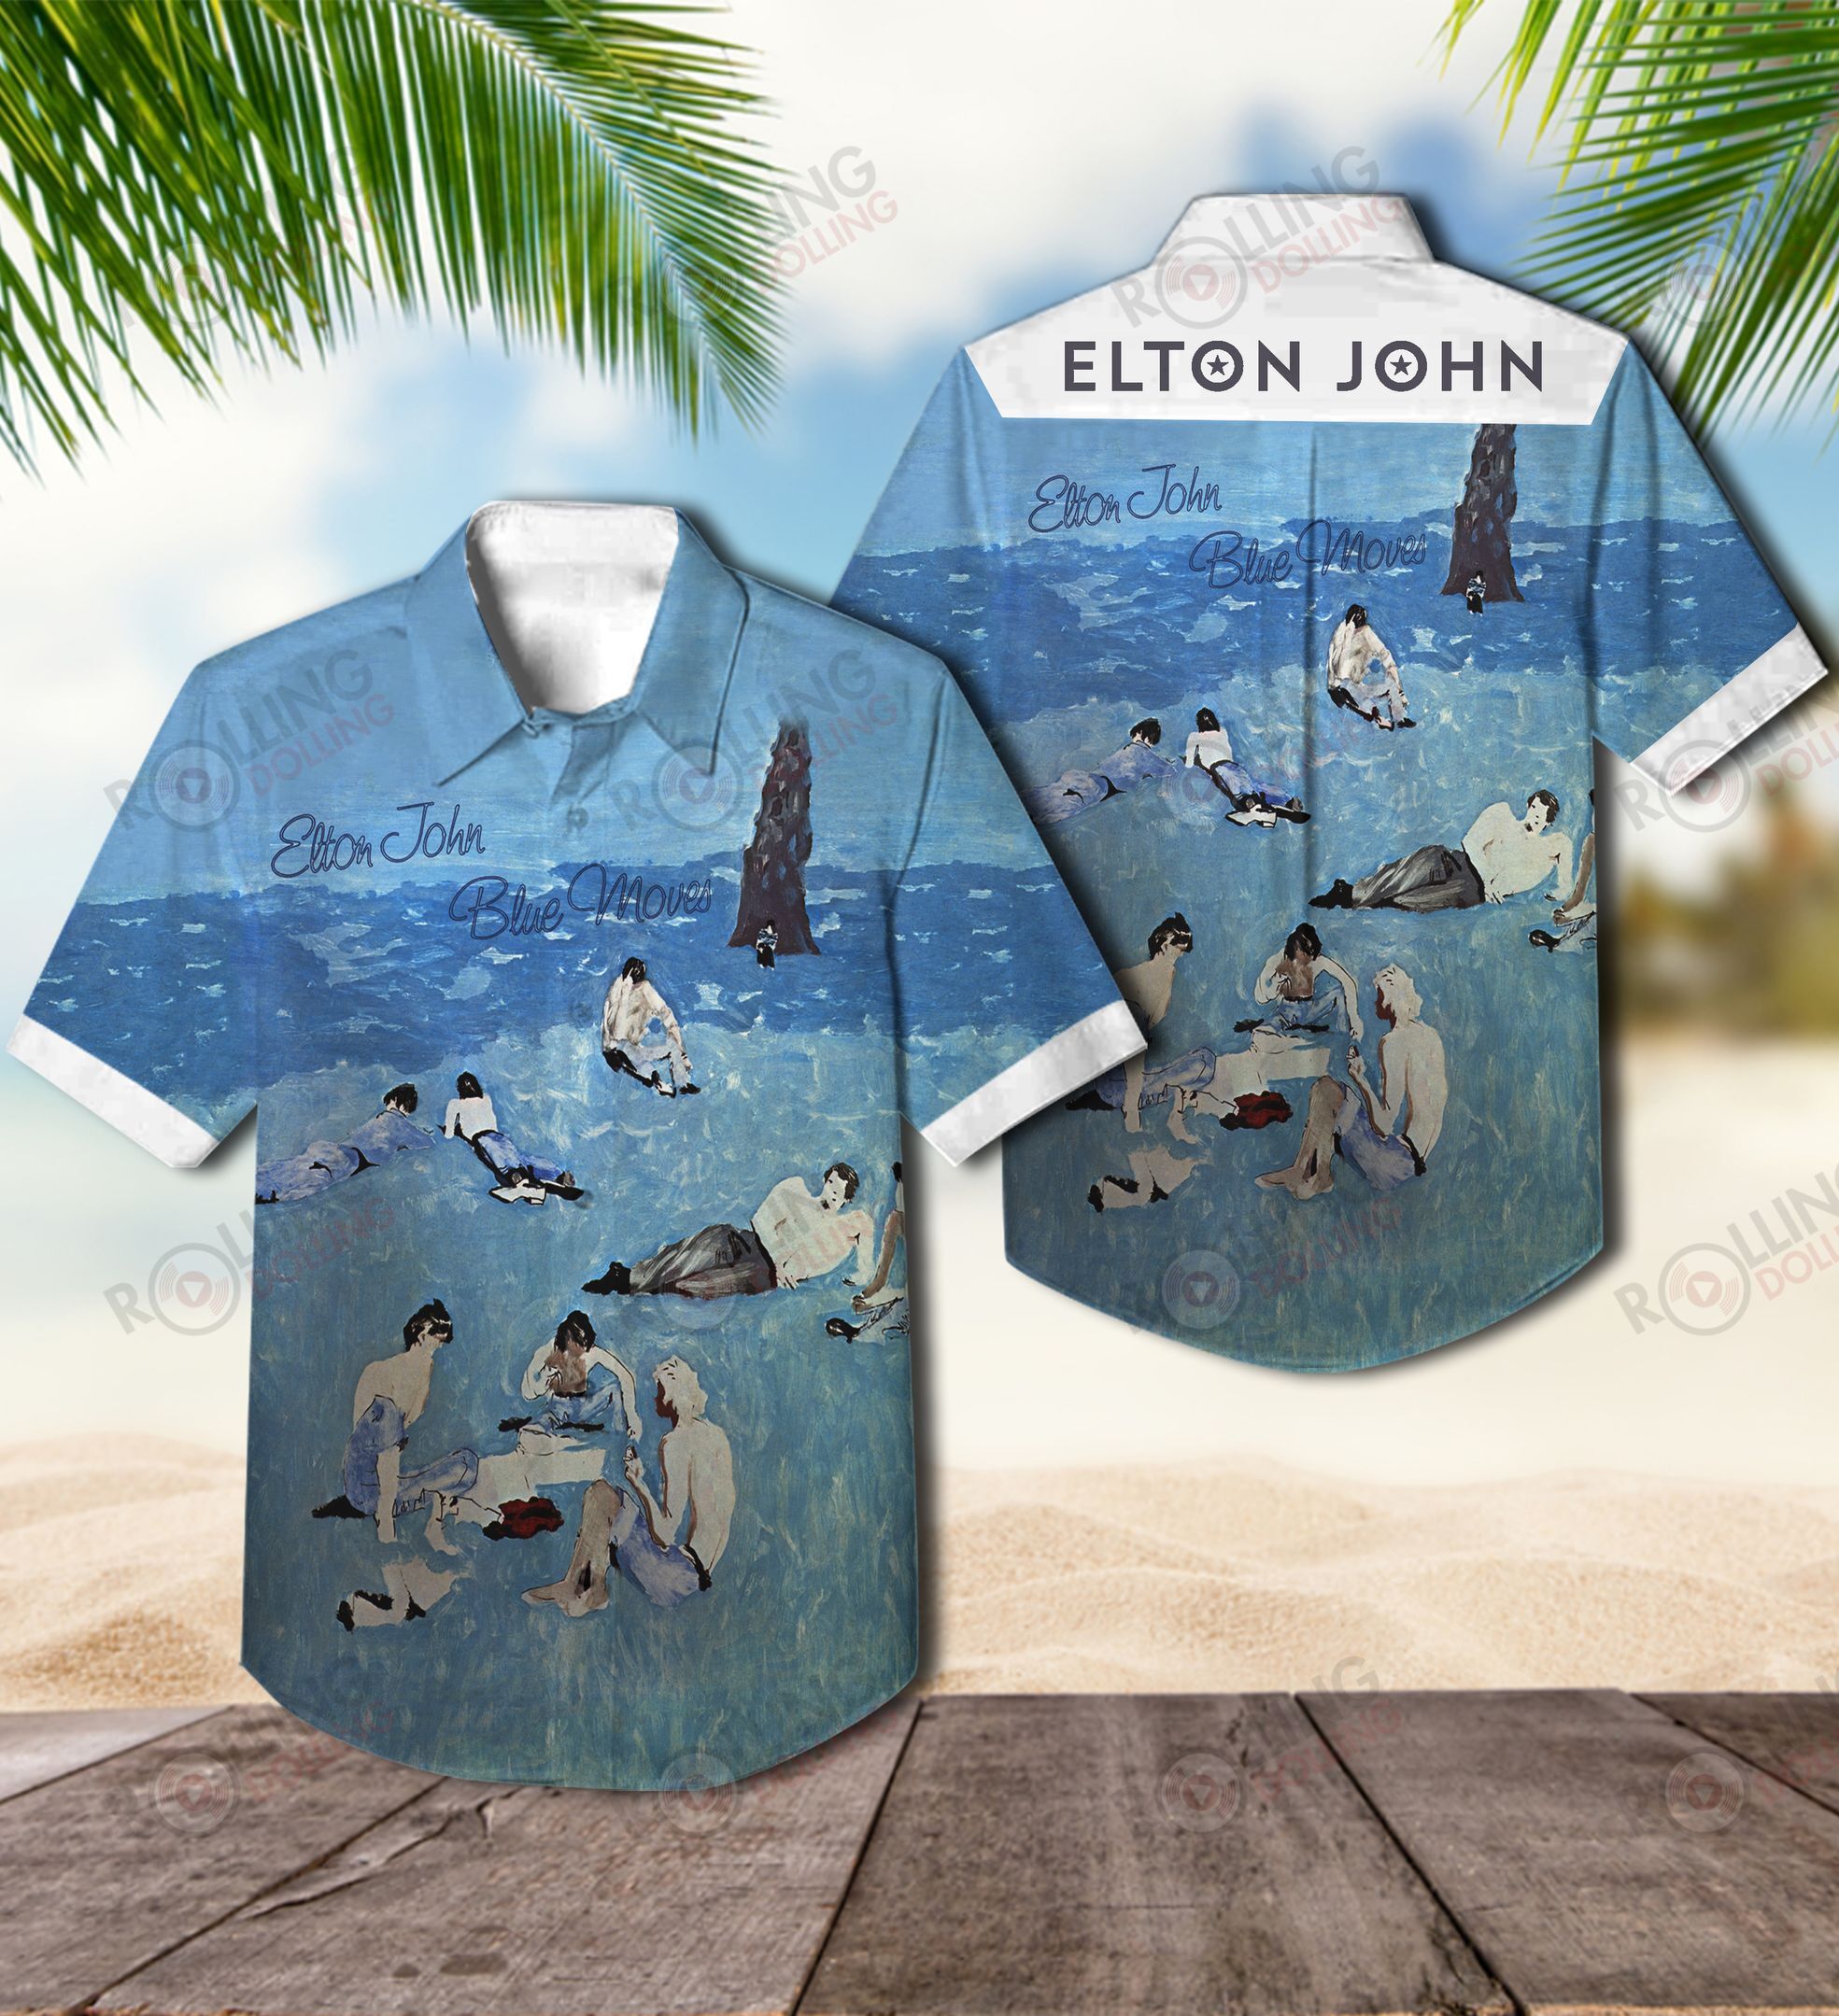 This Hawaiian shirt is an excellent choice if you go on vacation 45